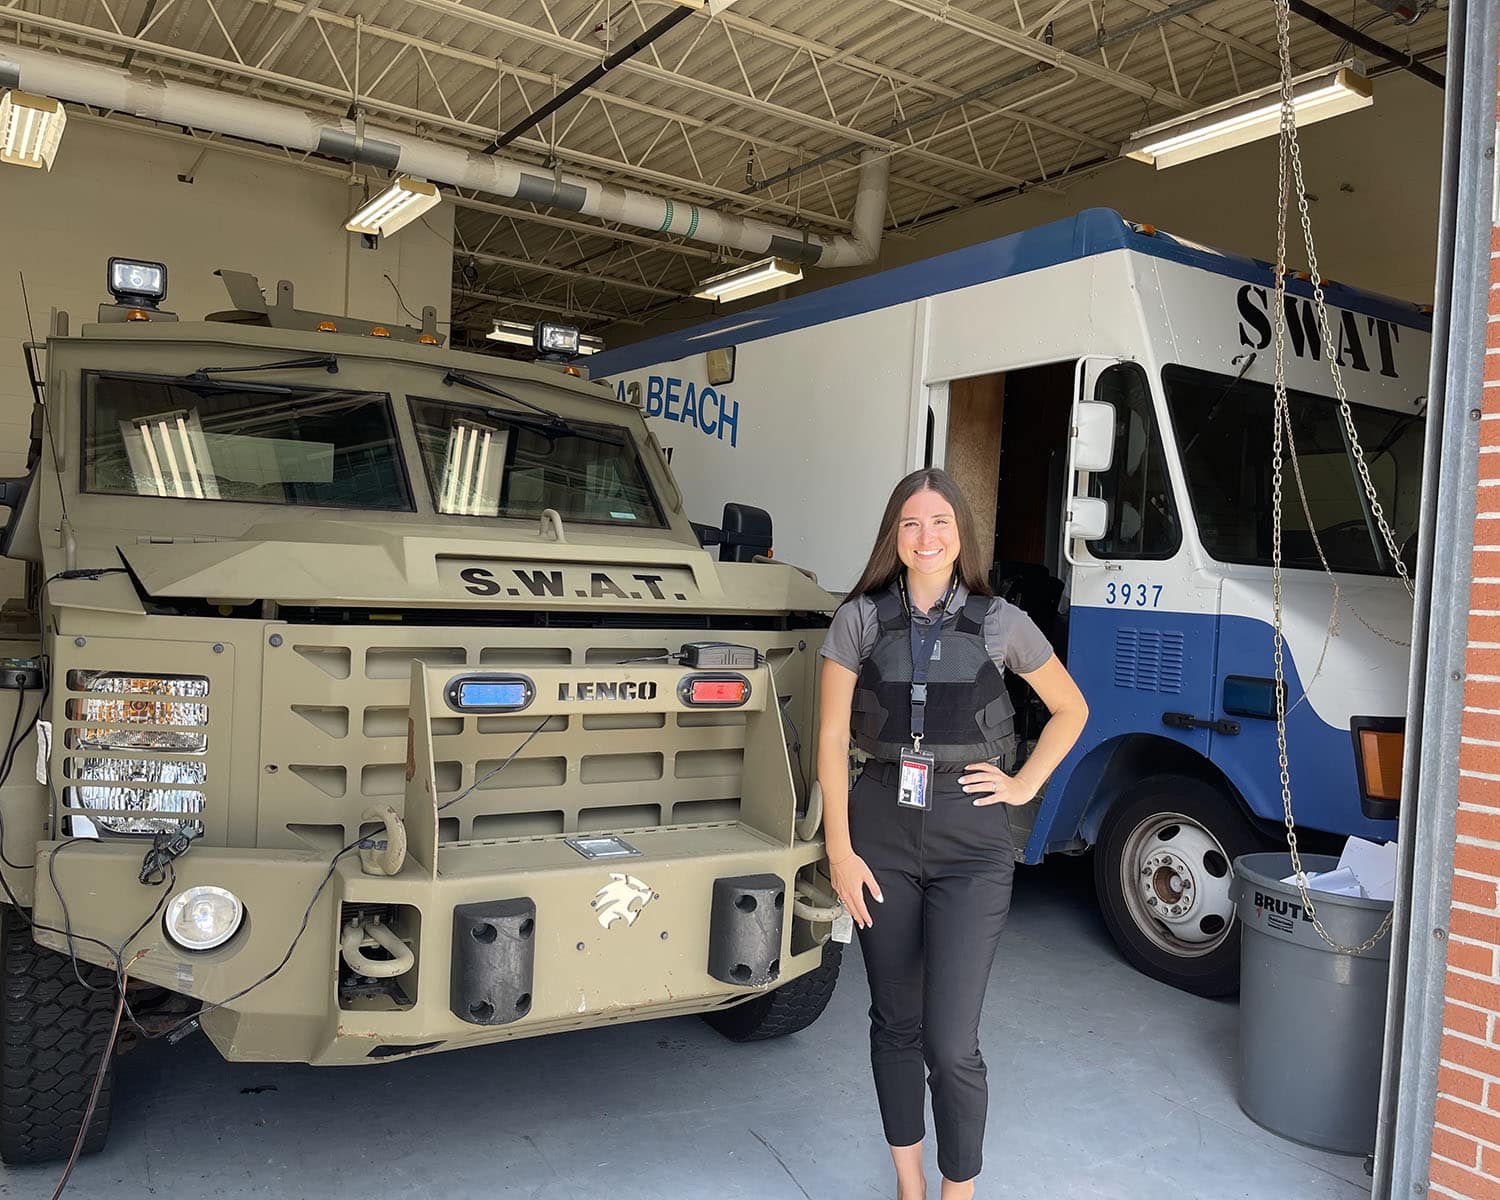 Hannah stands in a parking bay in front of two SWAT vehicles - one is a khaki-colored armored Lenco BearCat and the other is a blue and white delivery vehicle.